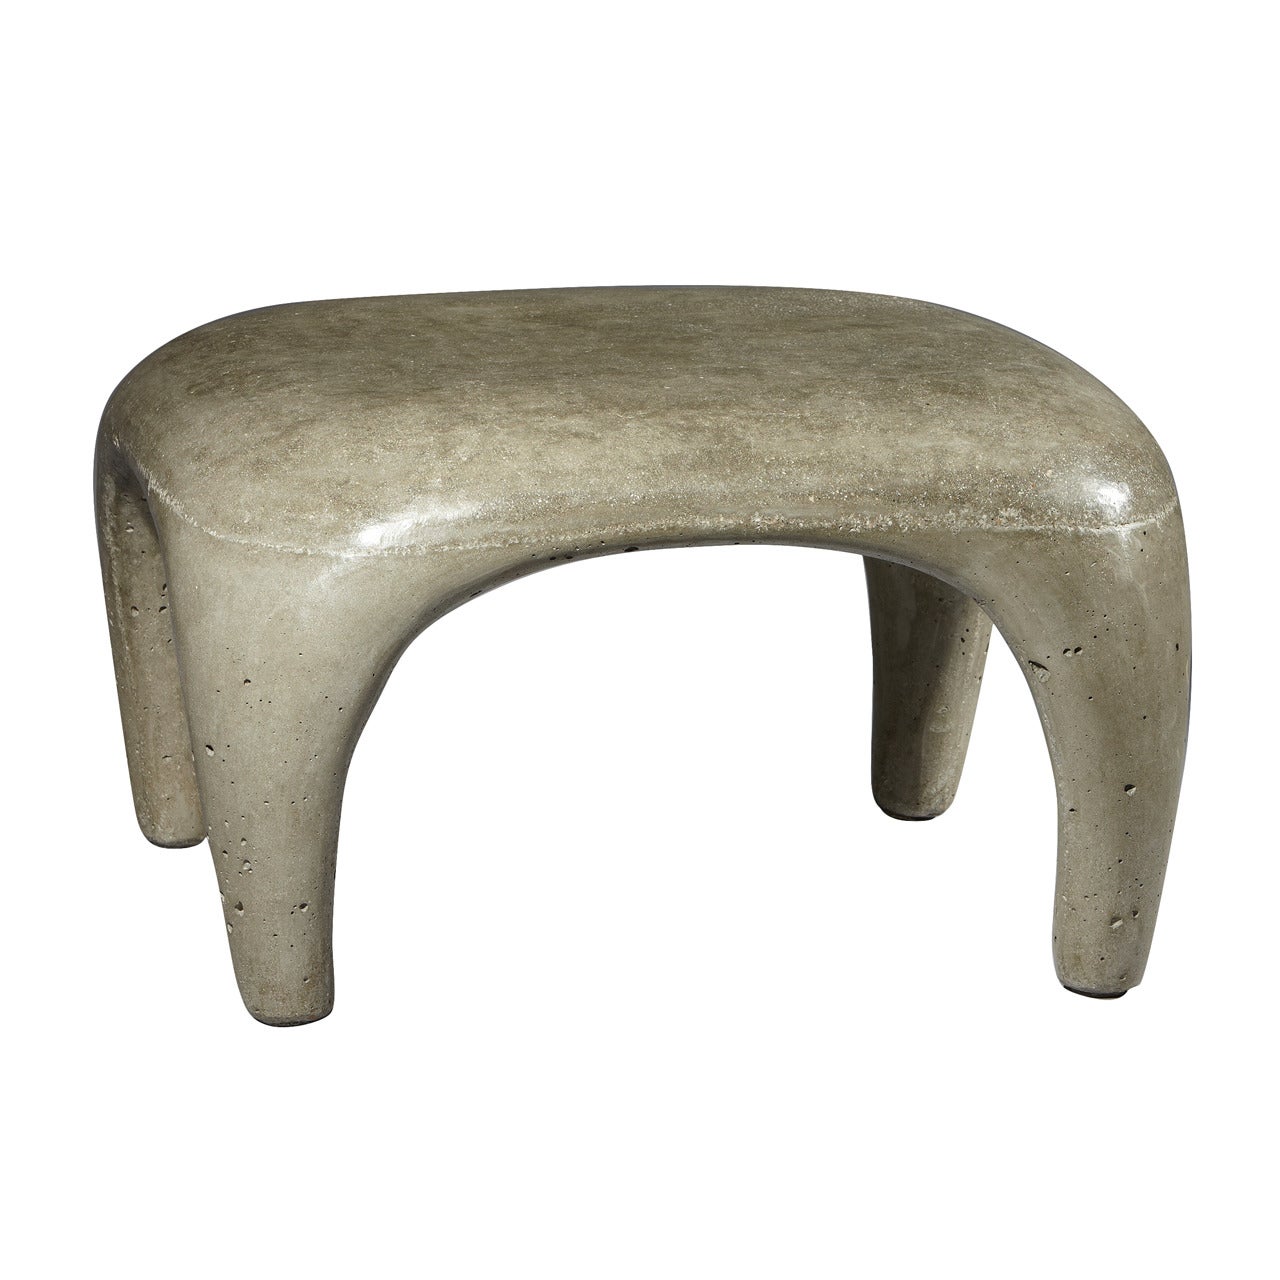 Unique Small Round Indoor/Outdoor Concrete Table Object By Lee Hun Chung, 2009 For Sale